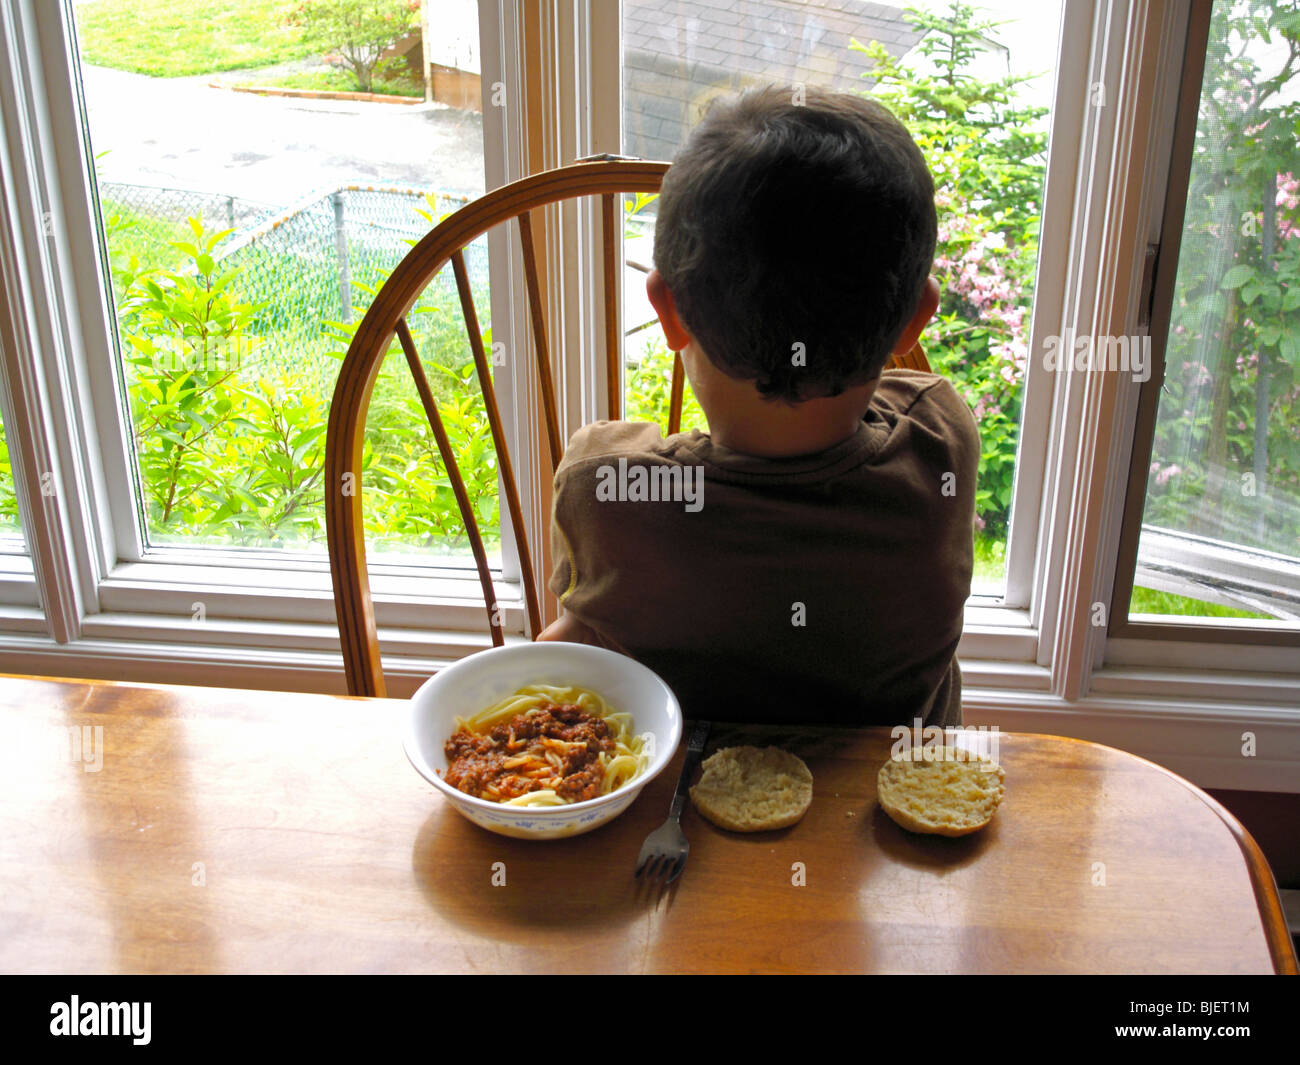 a four year old child having a temper tantrum at the dinner table and being defiant or a boy not eating because he is upset Stock Photo